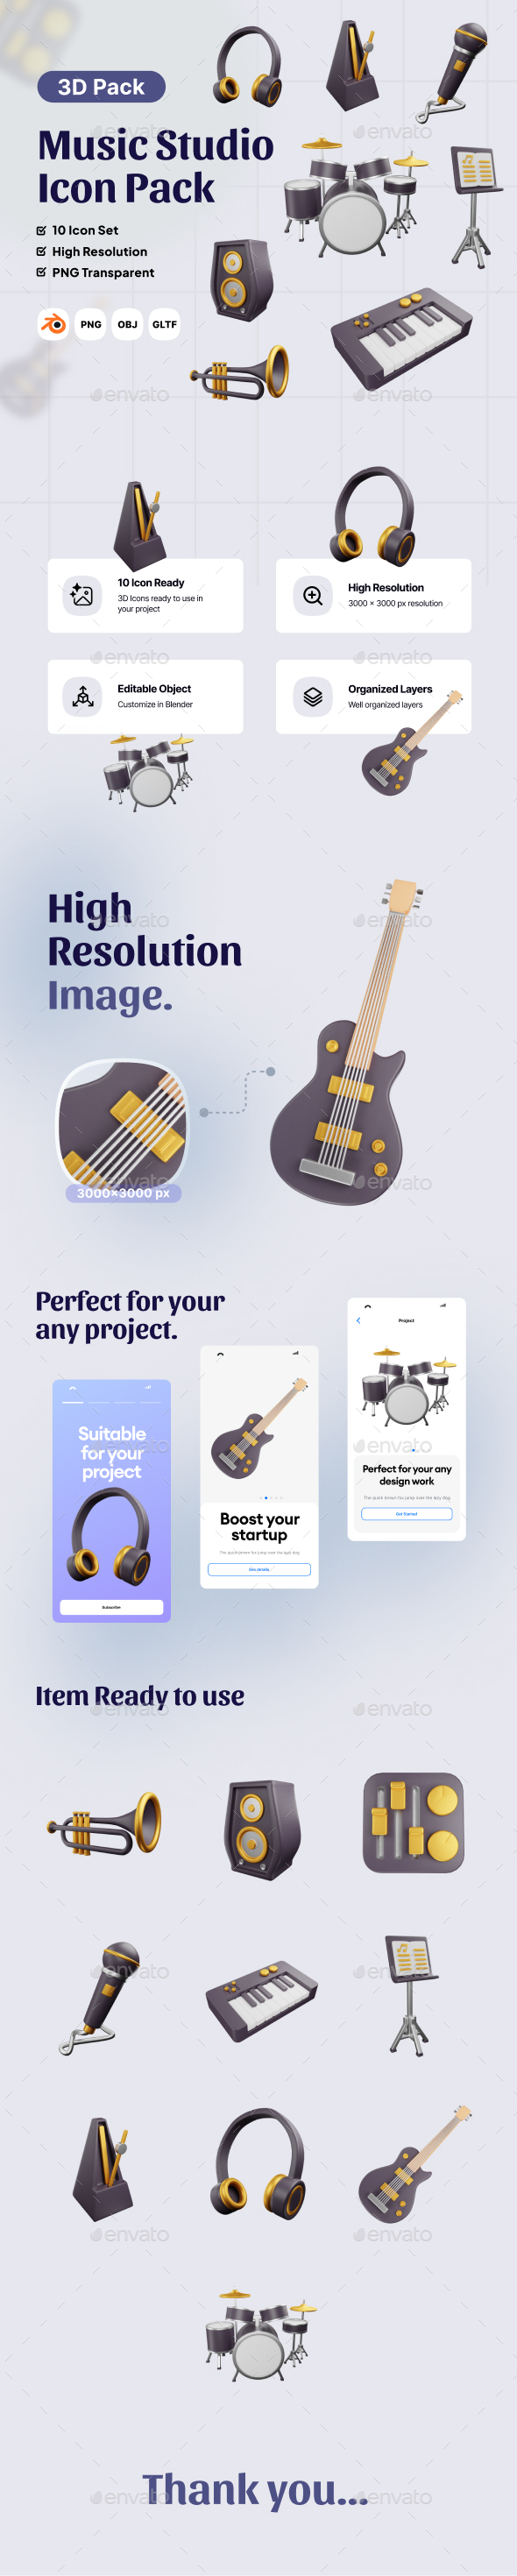 [DOWNLOAD]Music Studio 3D Icon Pack